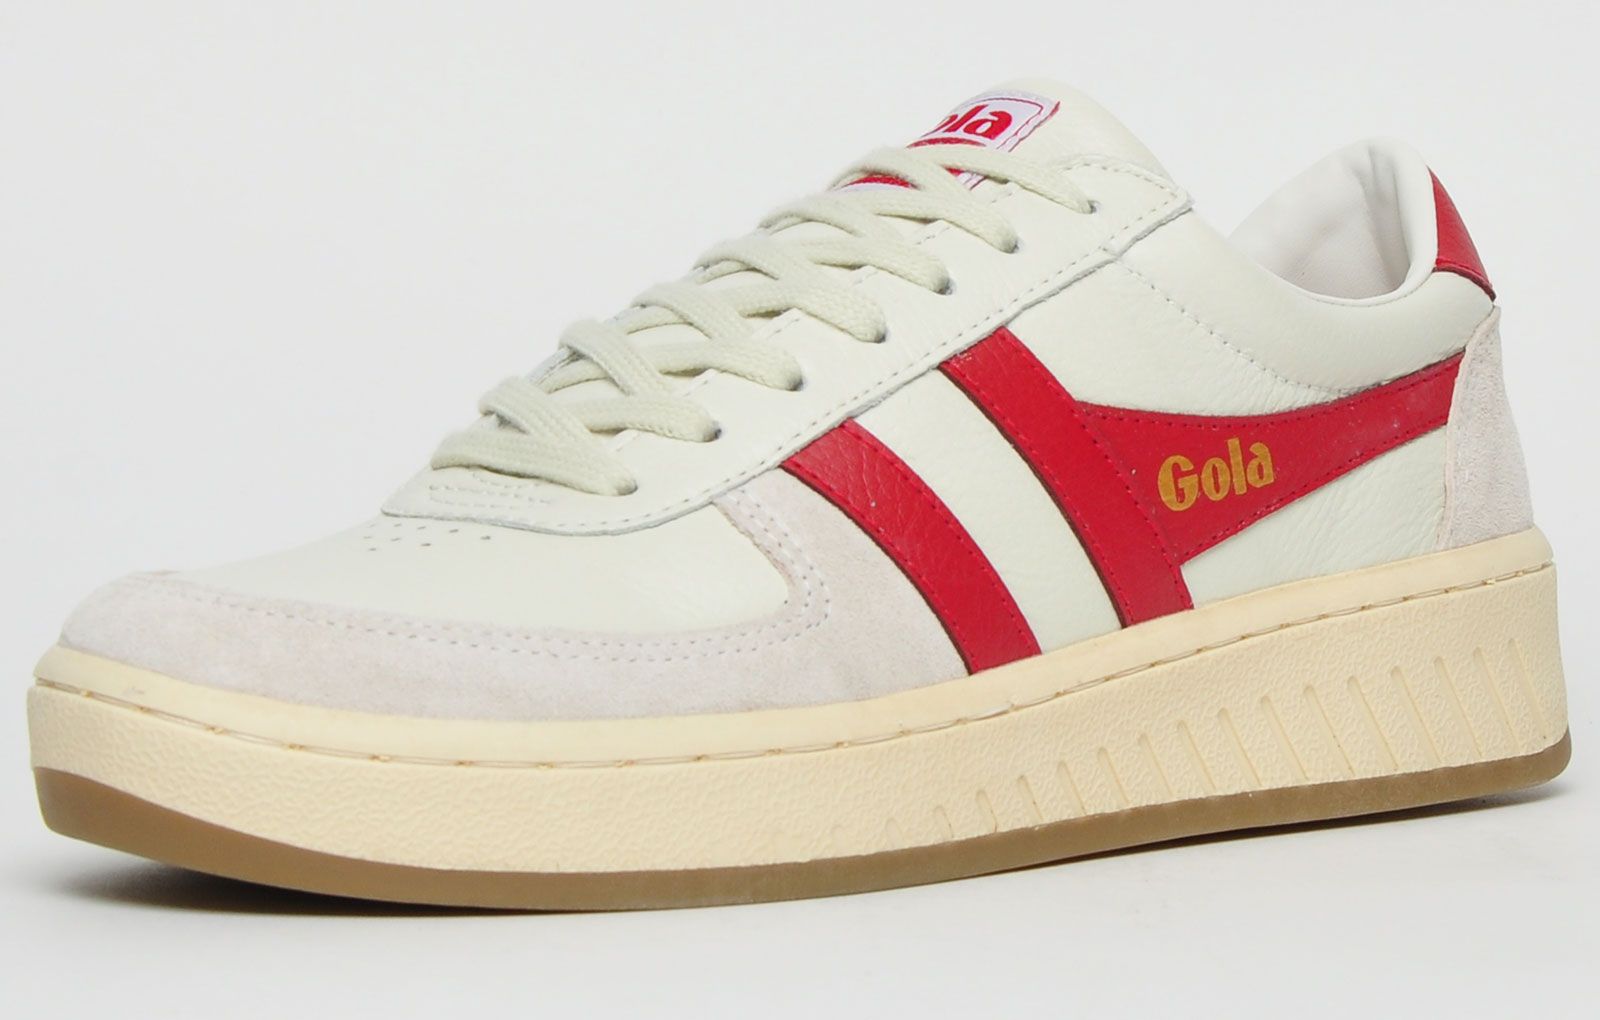 This Gola Classics Grandslam 78 is an on-trend silhouette paying homage to Gola’s British roots with the application of an off white and red colourway and contrast vintage styled outsole. <p>Tonal laces, suede trims and iconic Gola signature details finish the Grandslam 78 trainers off in style.</p> <p>- Leather upper</p> <p>- Vintage retro styling</p> <p>- Secure lace up system</p> <p>- Vintage styled outsole</p> <p>- Gola classic branding throughout</p>